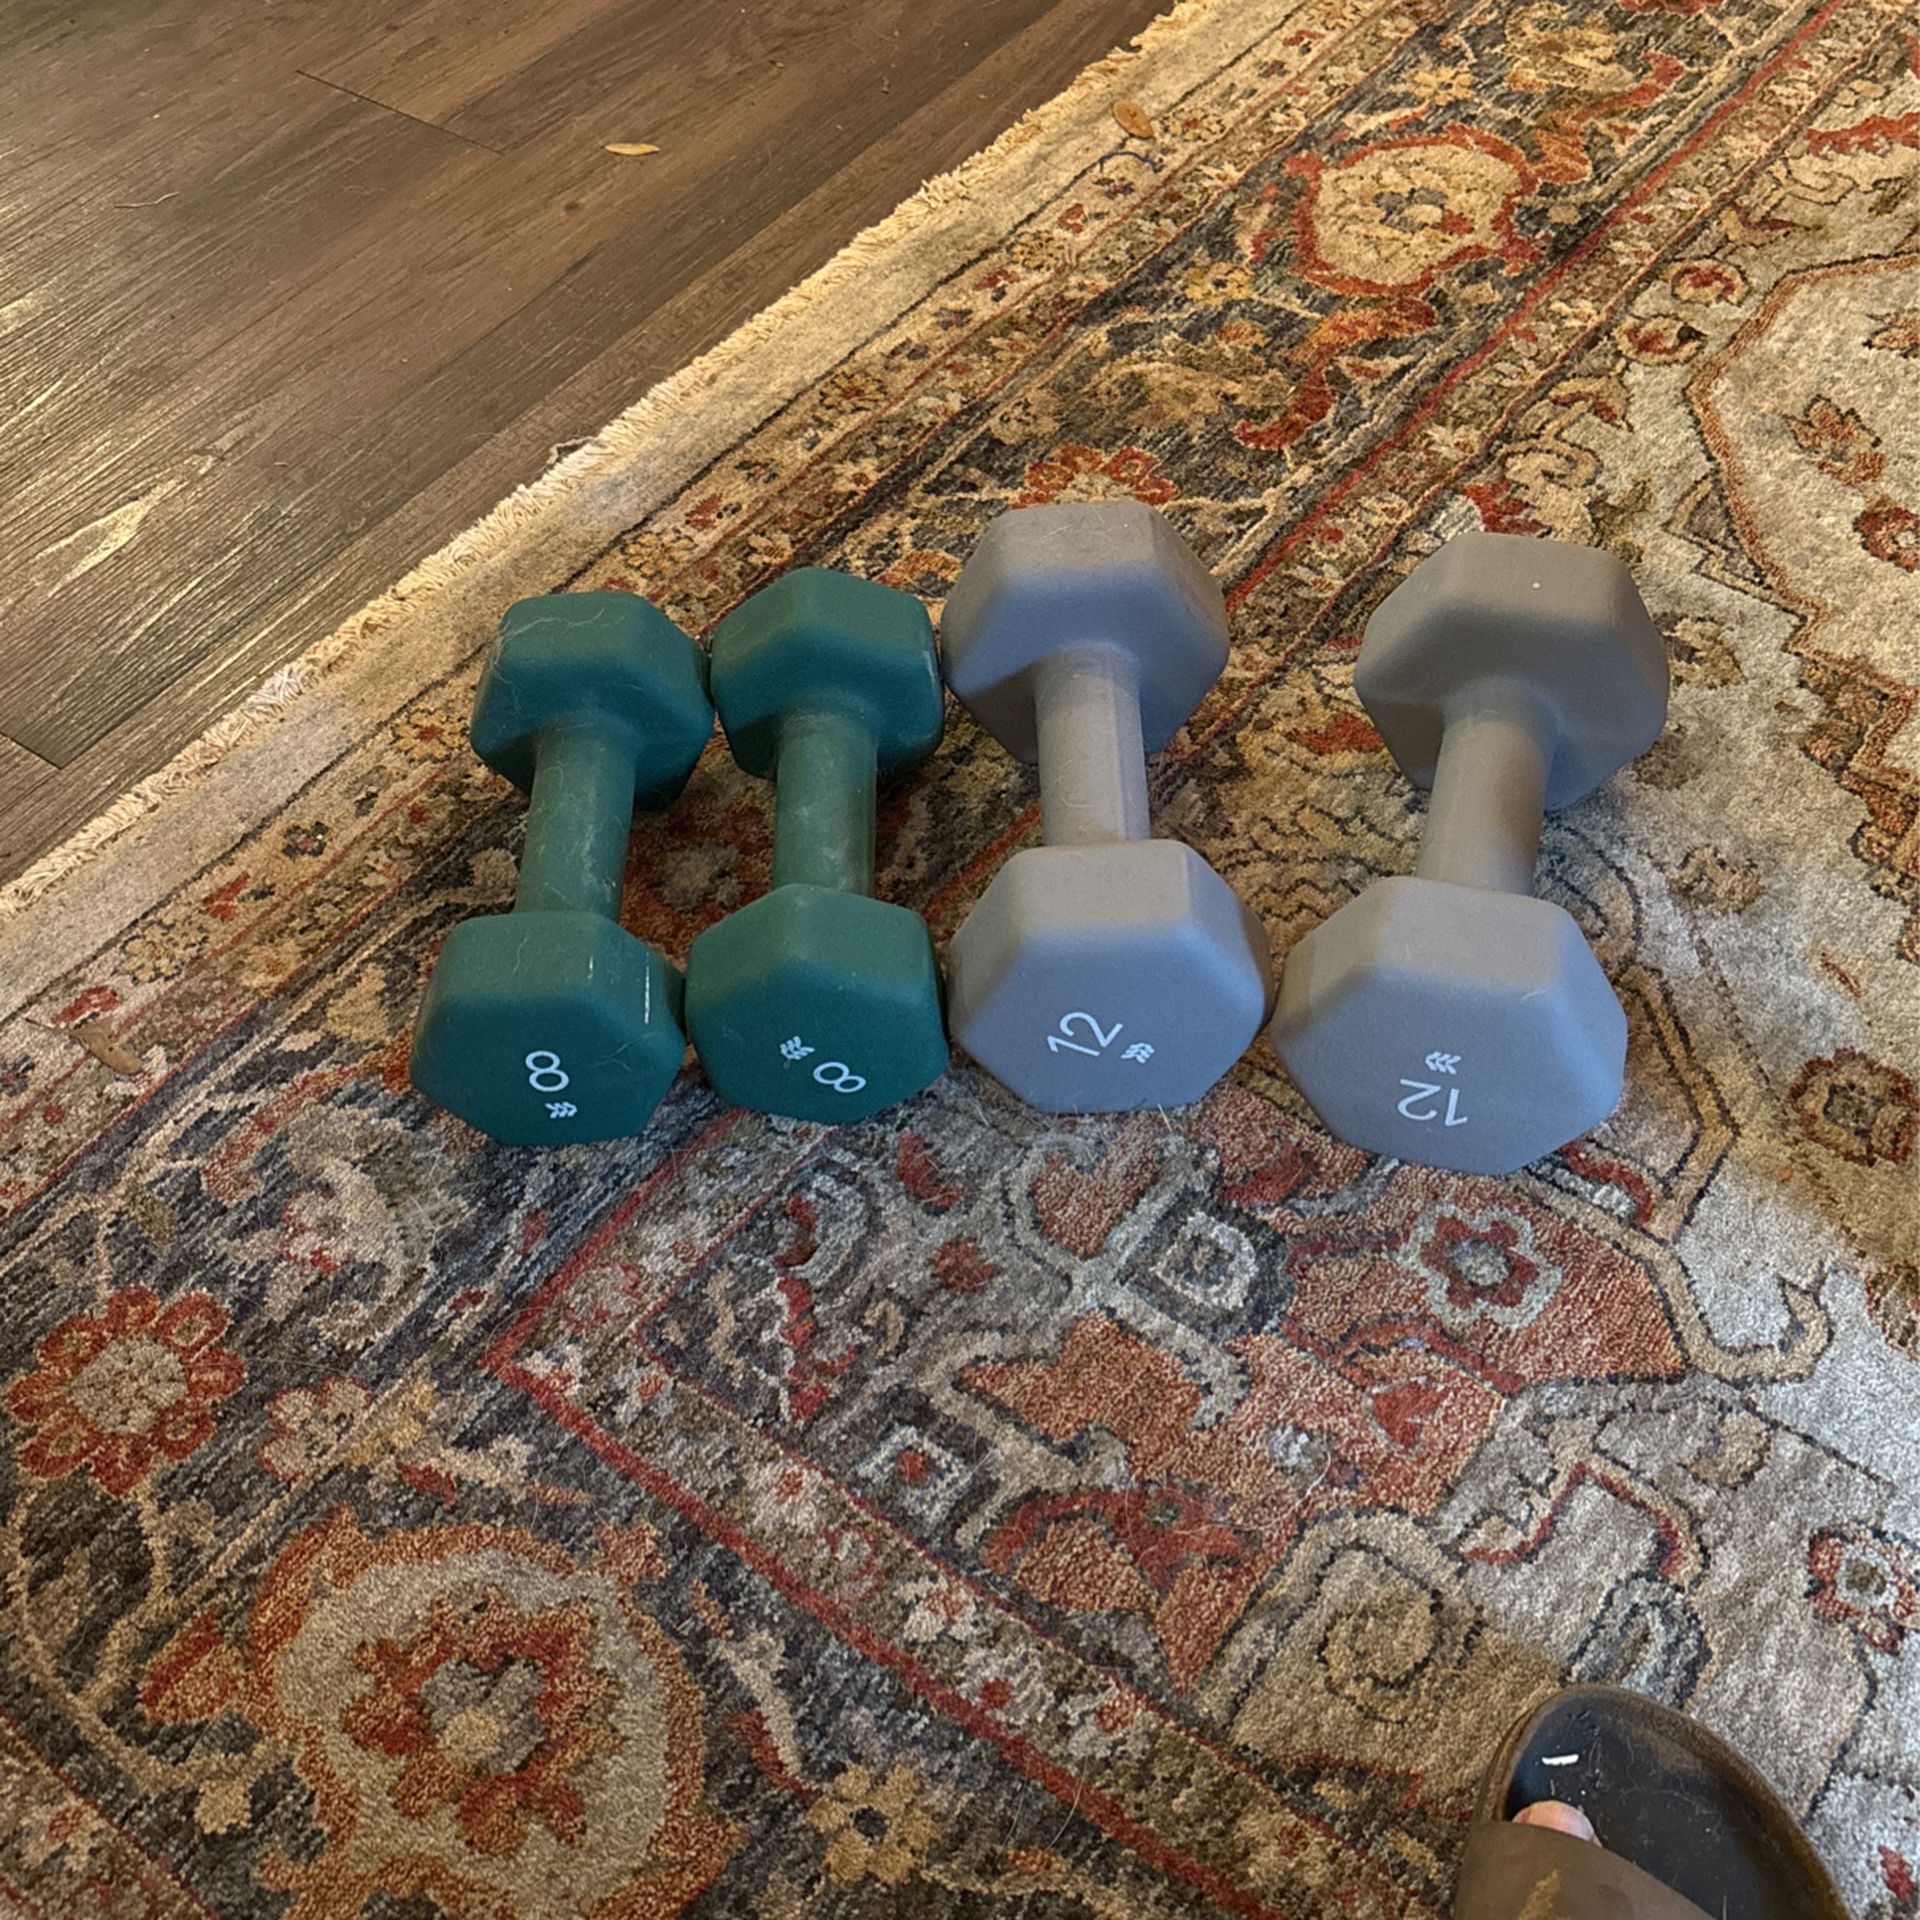 8 & 12 Lb Dumbbell Weights 